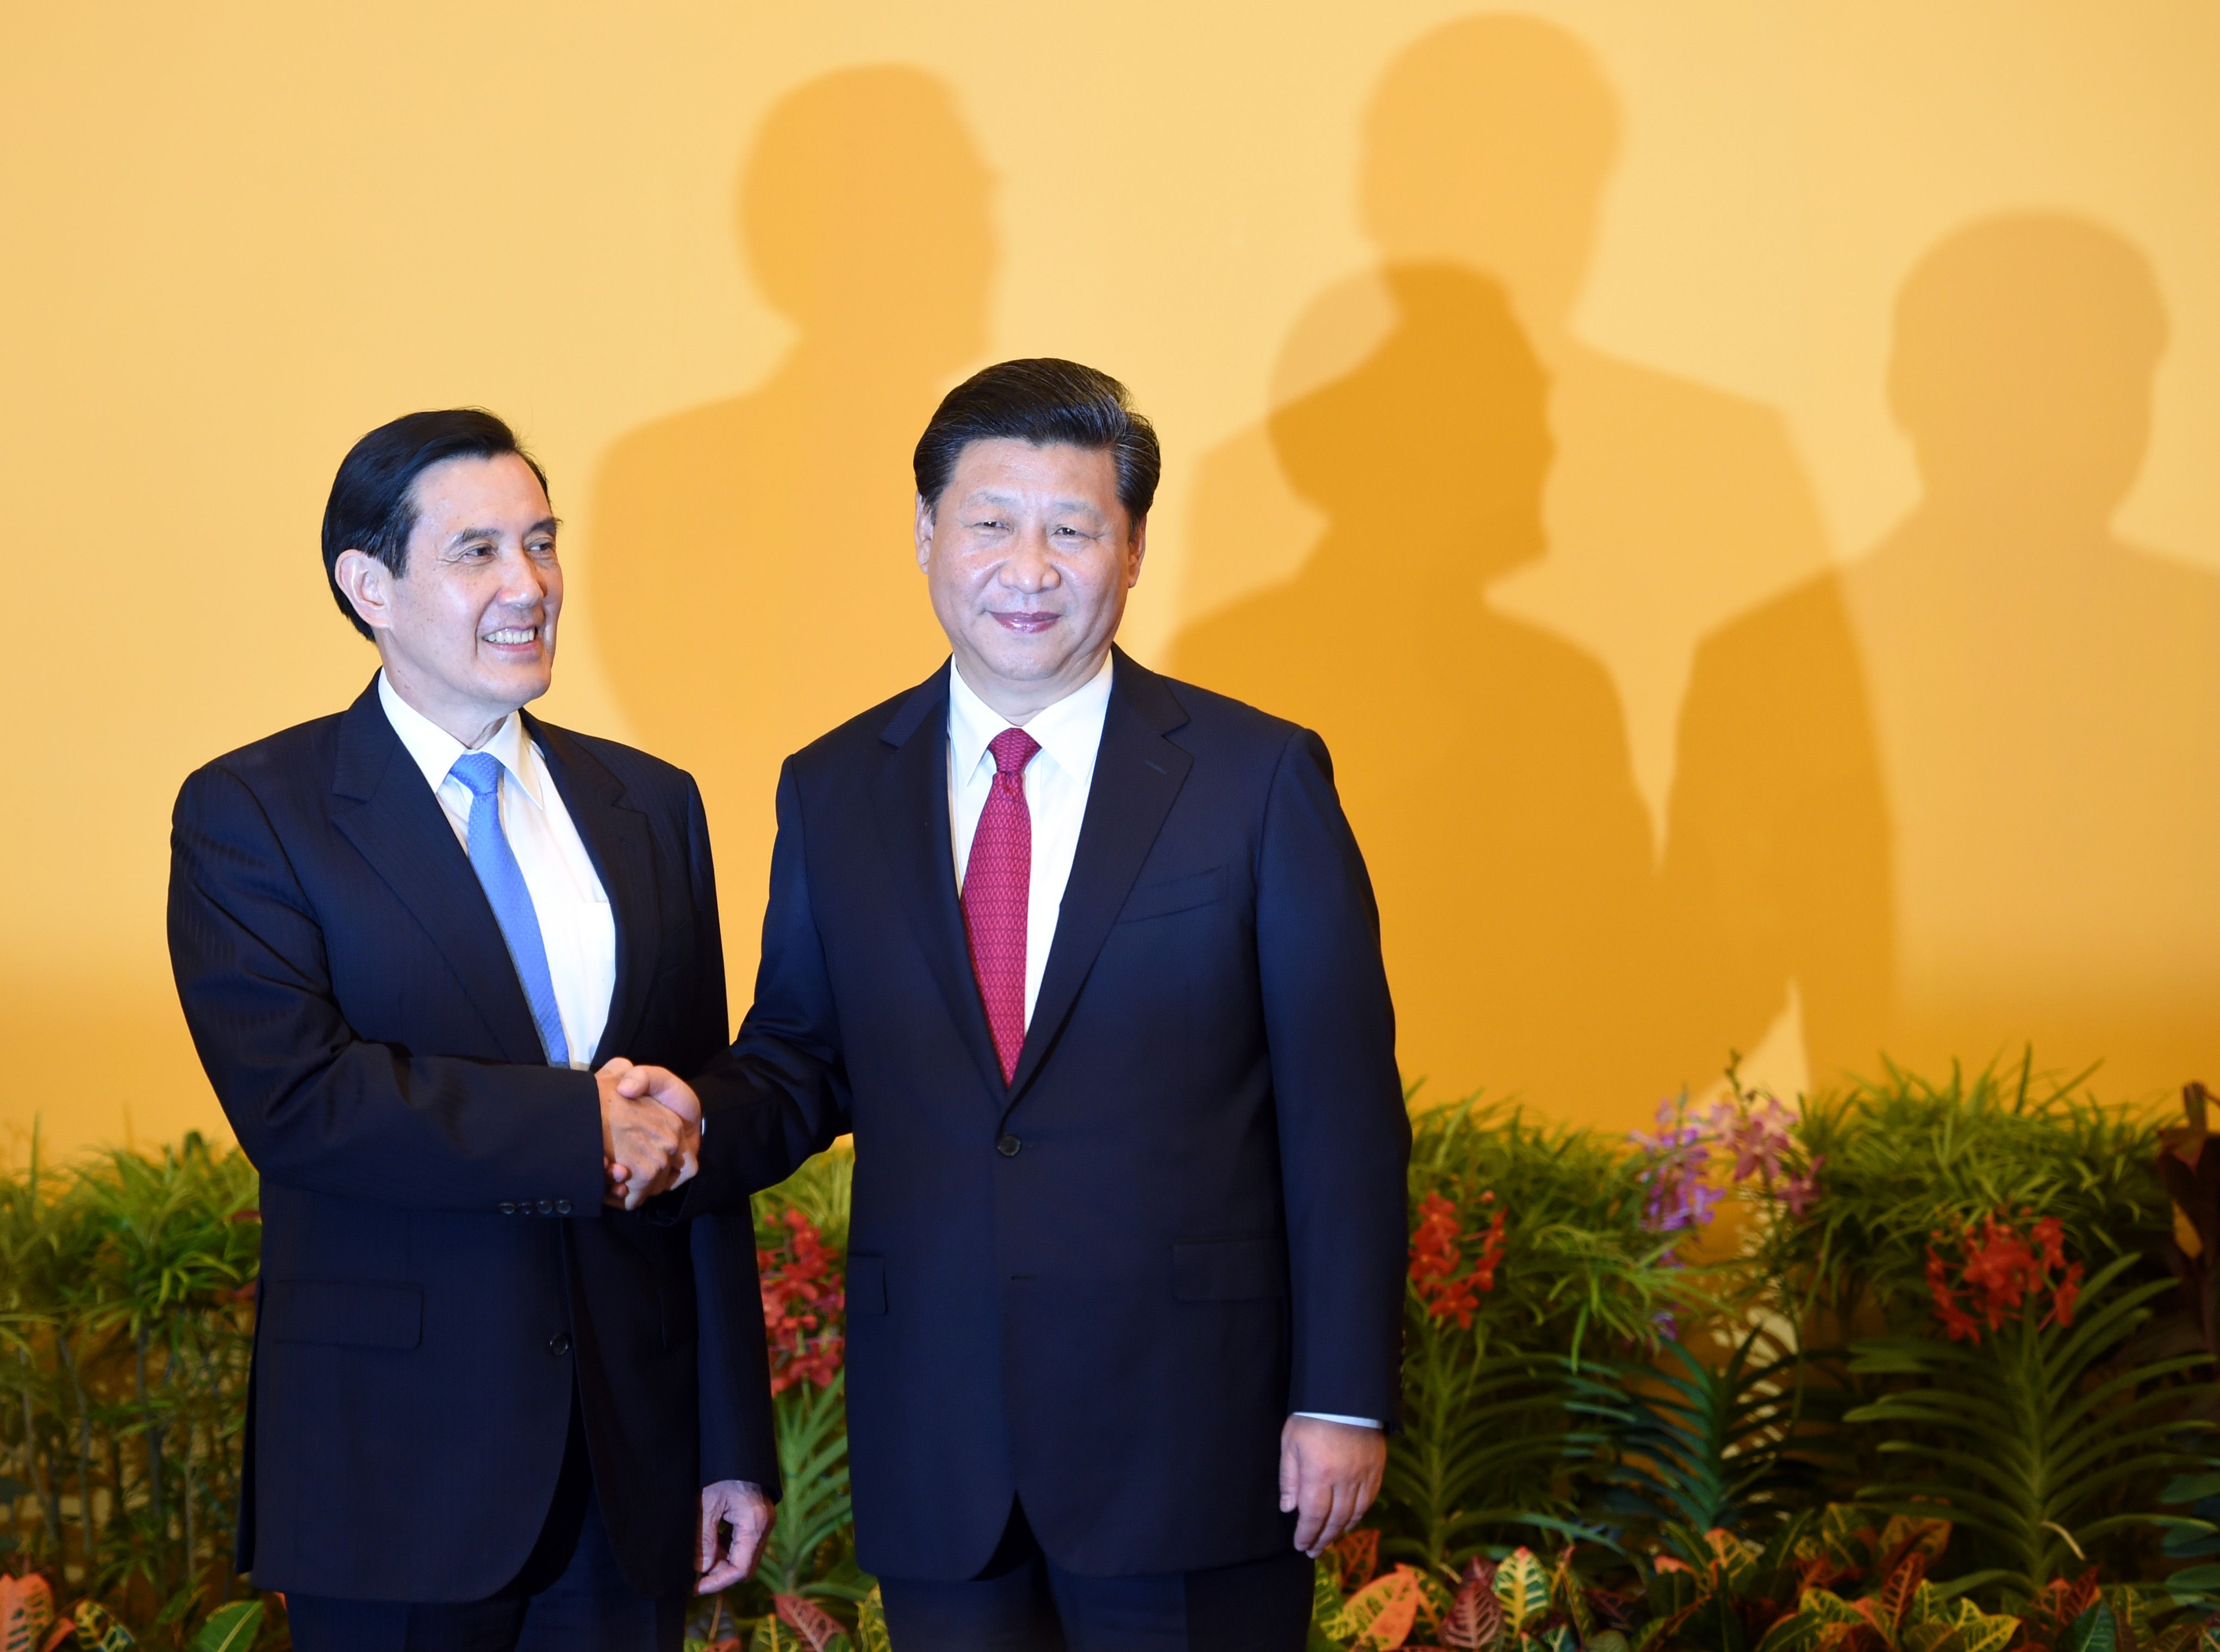 -- AFP PICTURES OF THE YEAR 2015 -- Chinese President Xi Jinping (R) shakes hands with Taiwan President Ma Ying-jeou before their meeting at Shangrila hotel in Singapore on November 7, 2015. The leaders of China and Taiwan hold a historic summit that will put a once unthinkable presidential seal on warming ties between the former Cold War rivals. AFP PHOTO / Roslan RAHMAN / AFP / ROSLAN RAHMAN